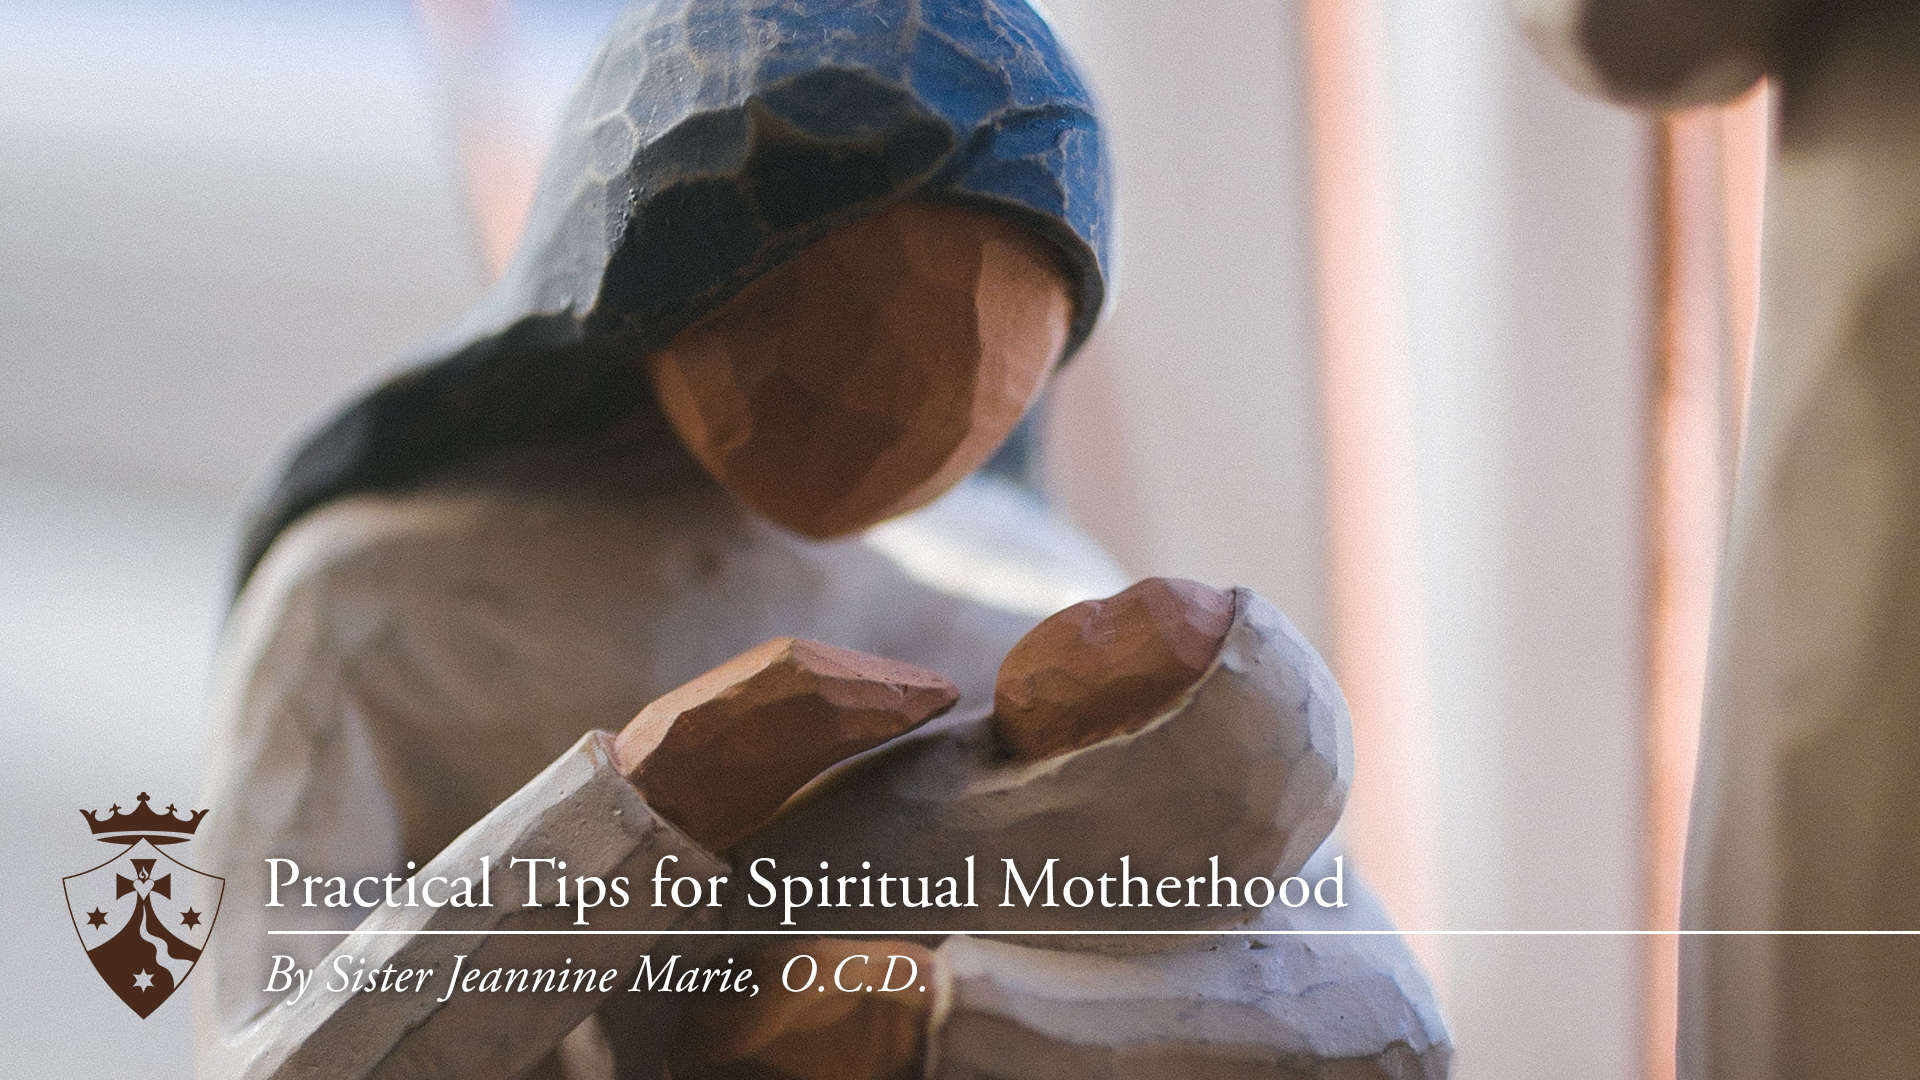 Wood carving of Mary holding Jesus, 'Practical Tips for Spiritual Motherhood, By Sister Jeannine Marie, O.C.D'